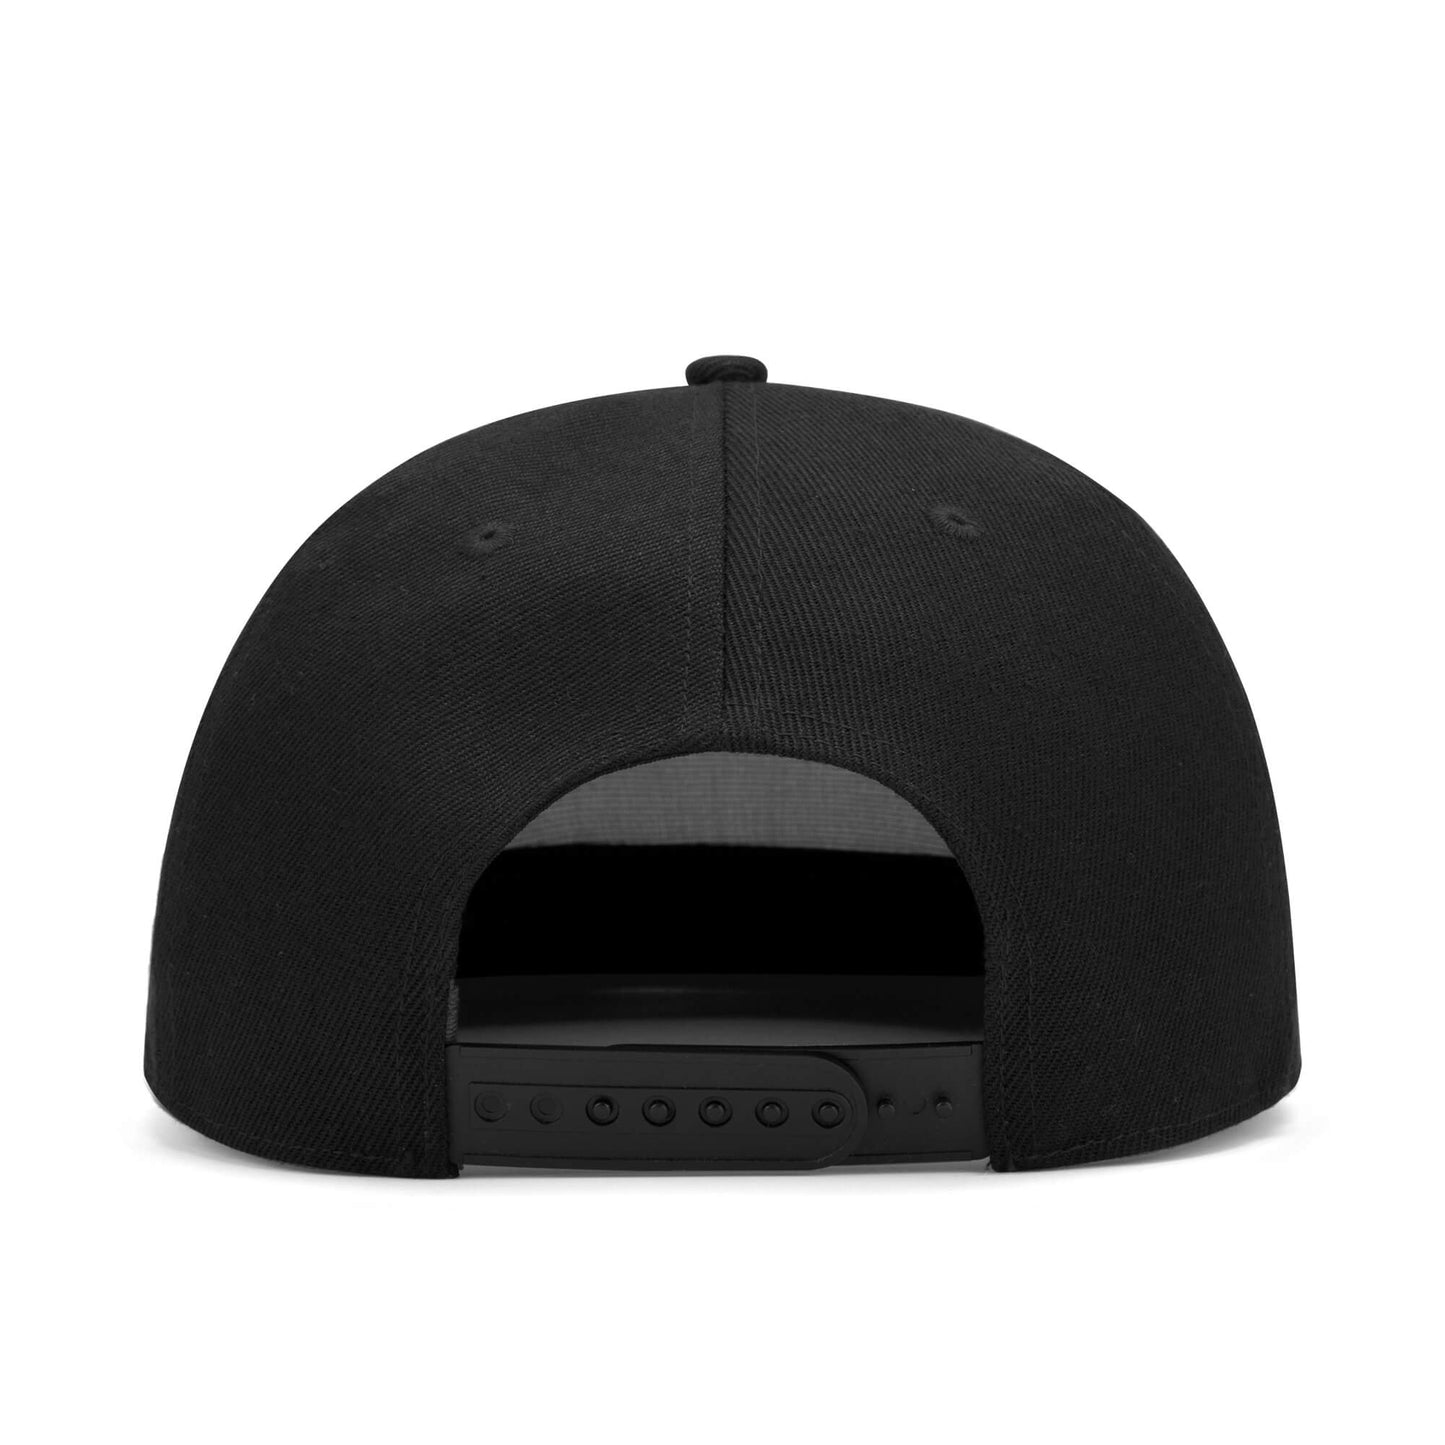 DOPiFiED Casual Hip-hop Hat